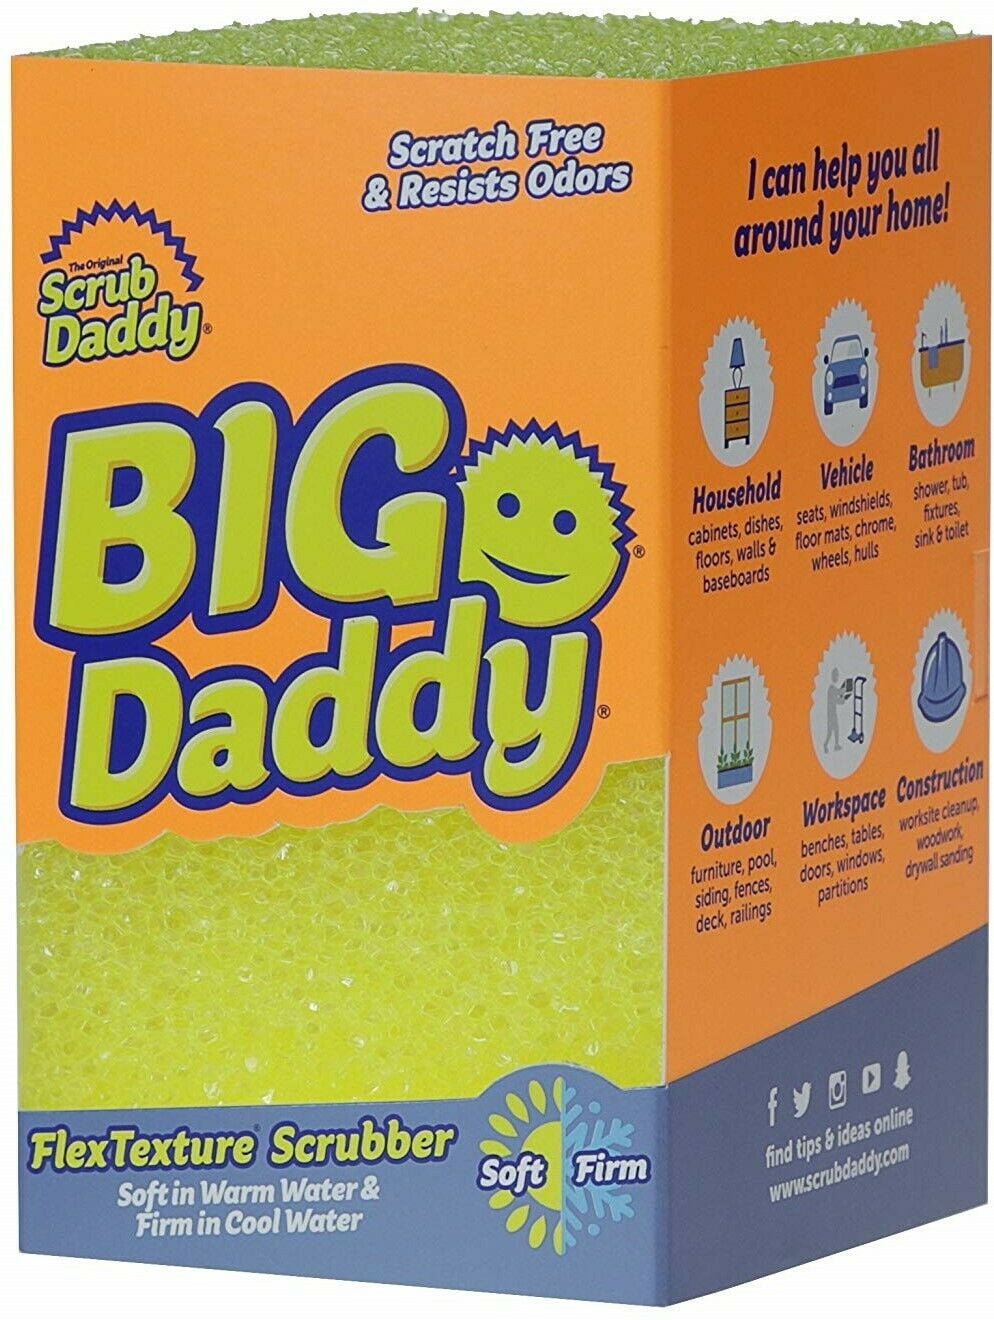 Have you tried the new Scrub Big Daddy? Get yours and use it with